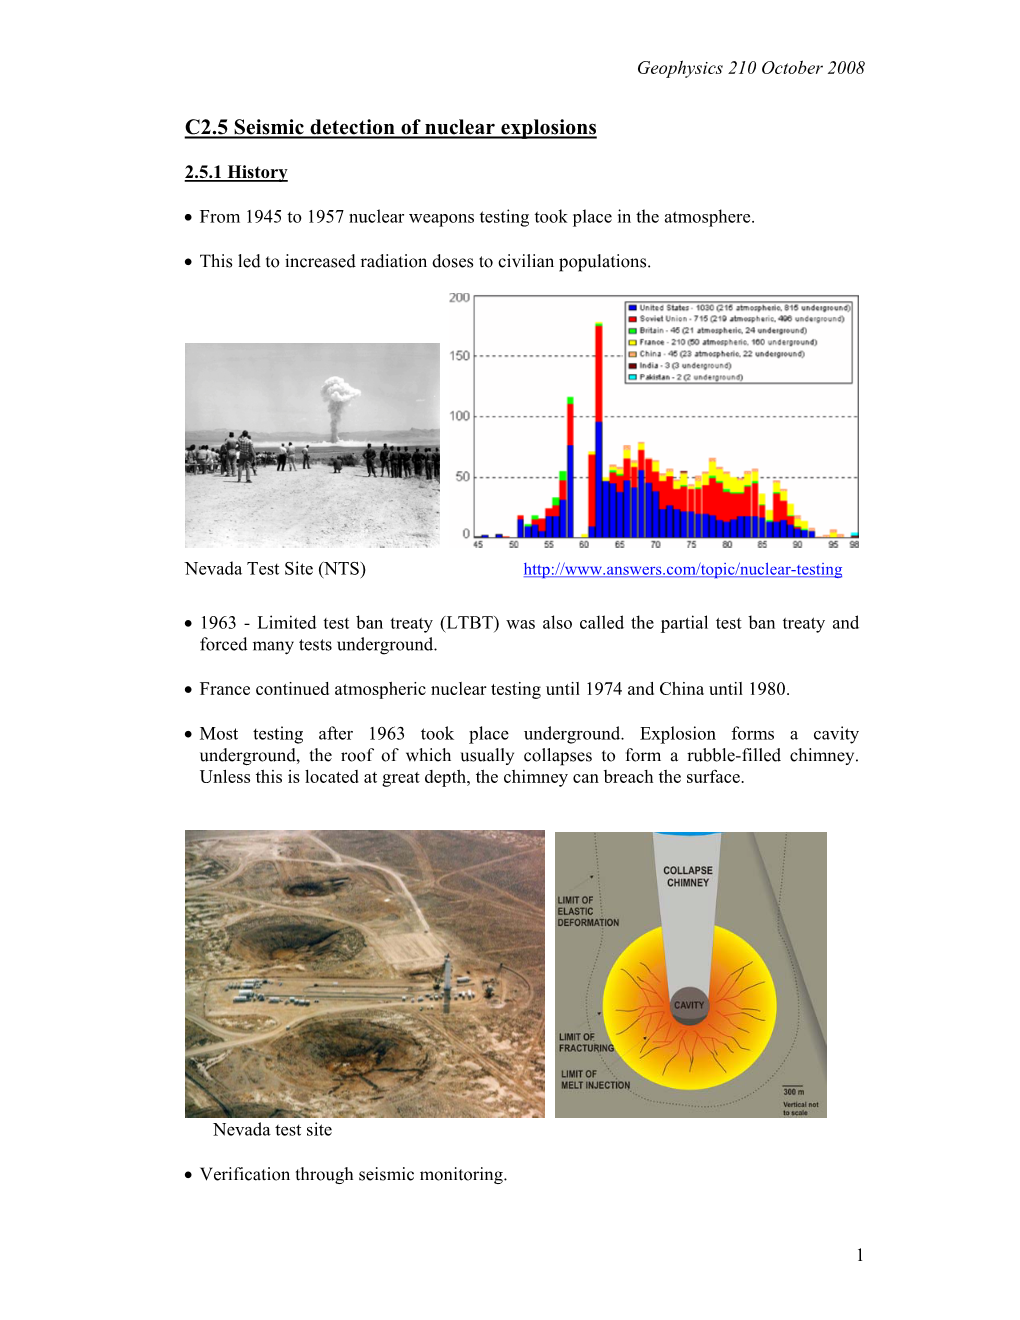 C2.5 Seismic Detection of Nuclear Explosions